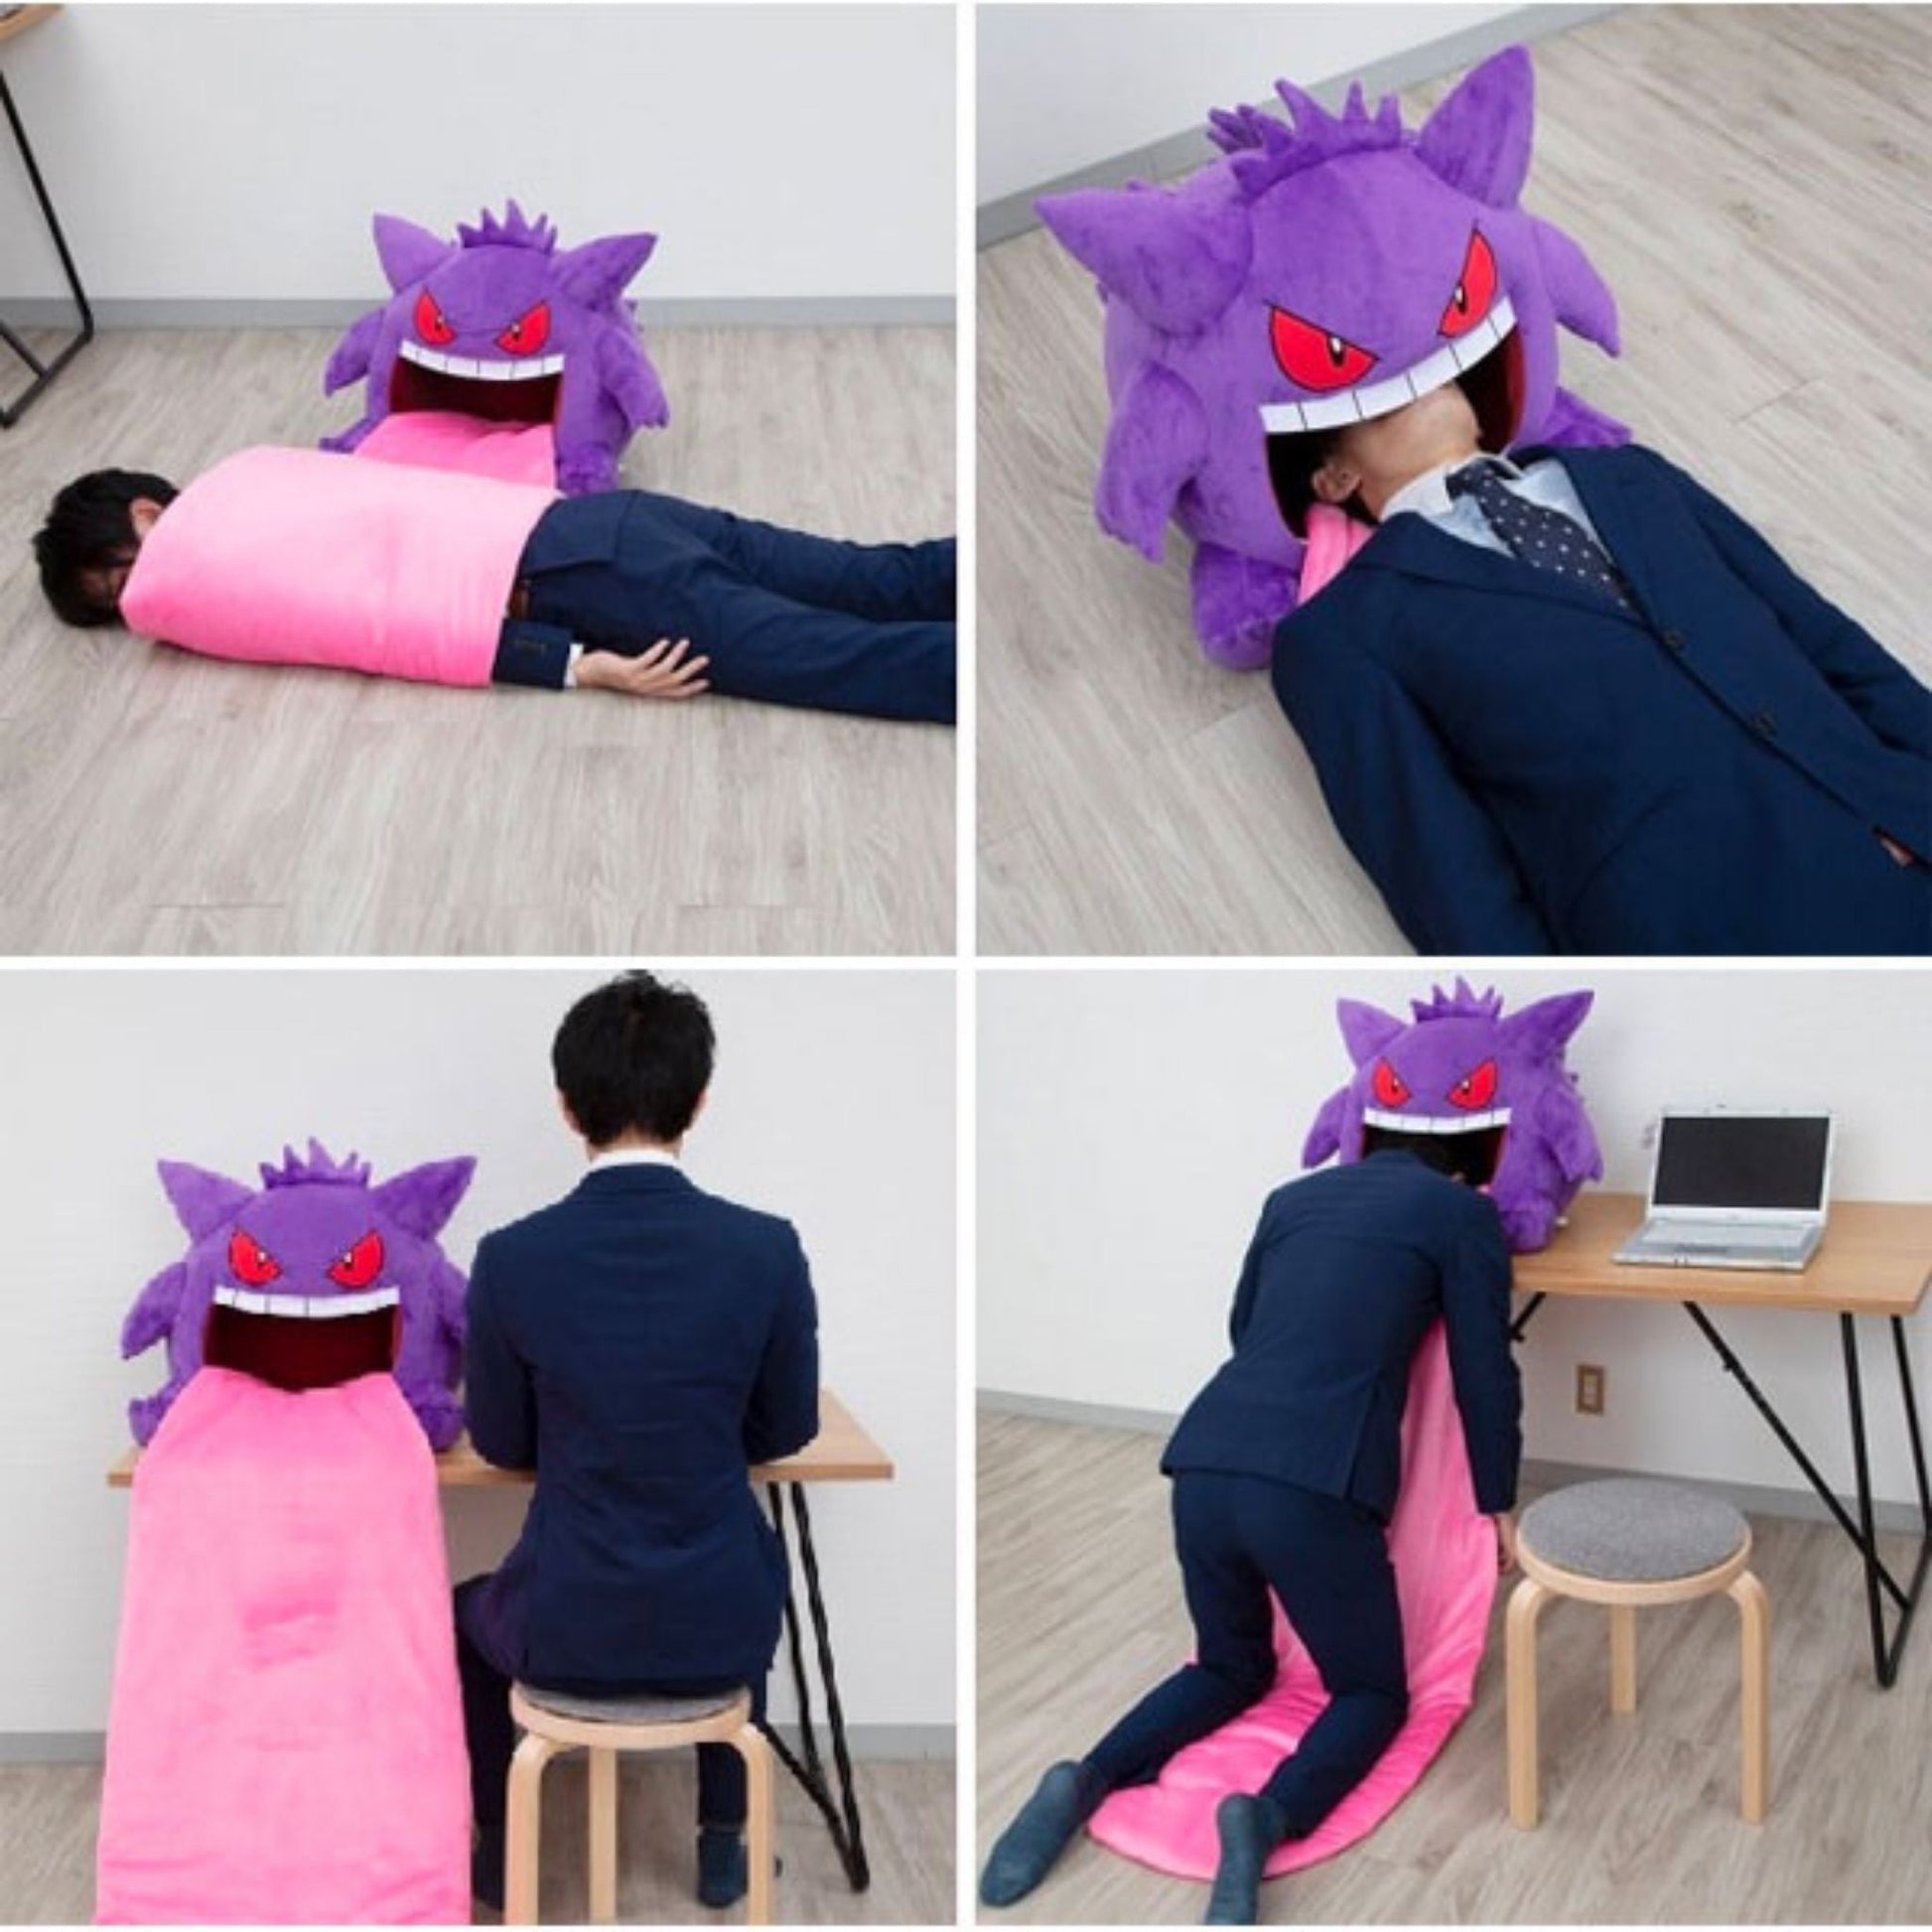 Use Cases In Office - Gengar Tongue Pillow Blanket Sleeping Pod For Afternoon Naps. Portable design for travel, work and on the go napping. Perfect gift for Pokémon fans.